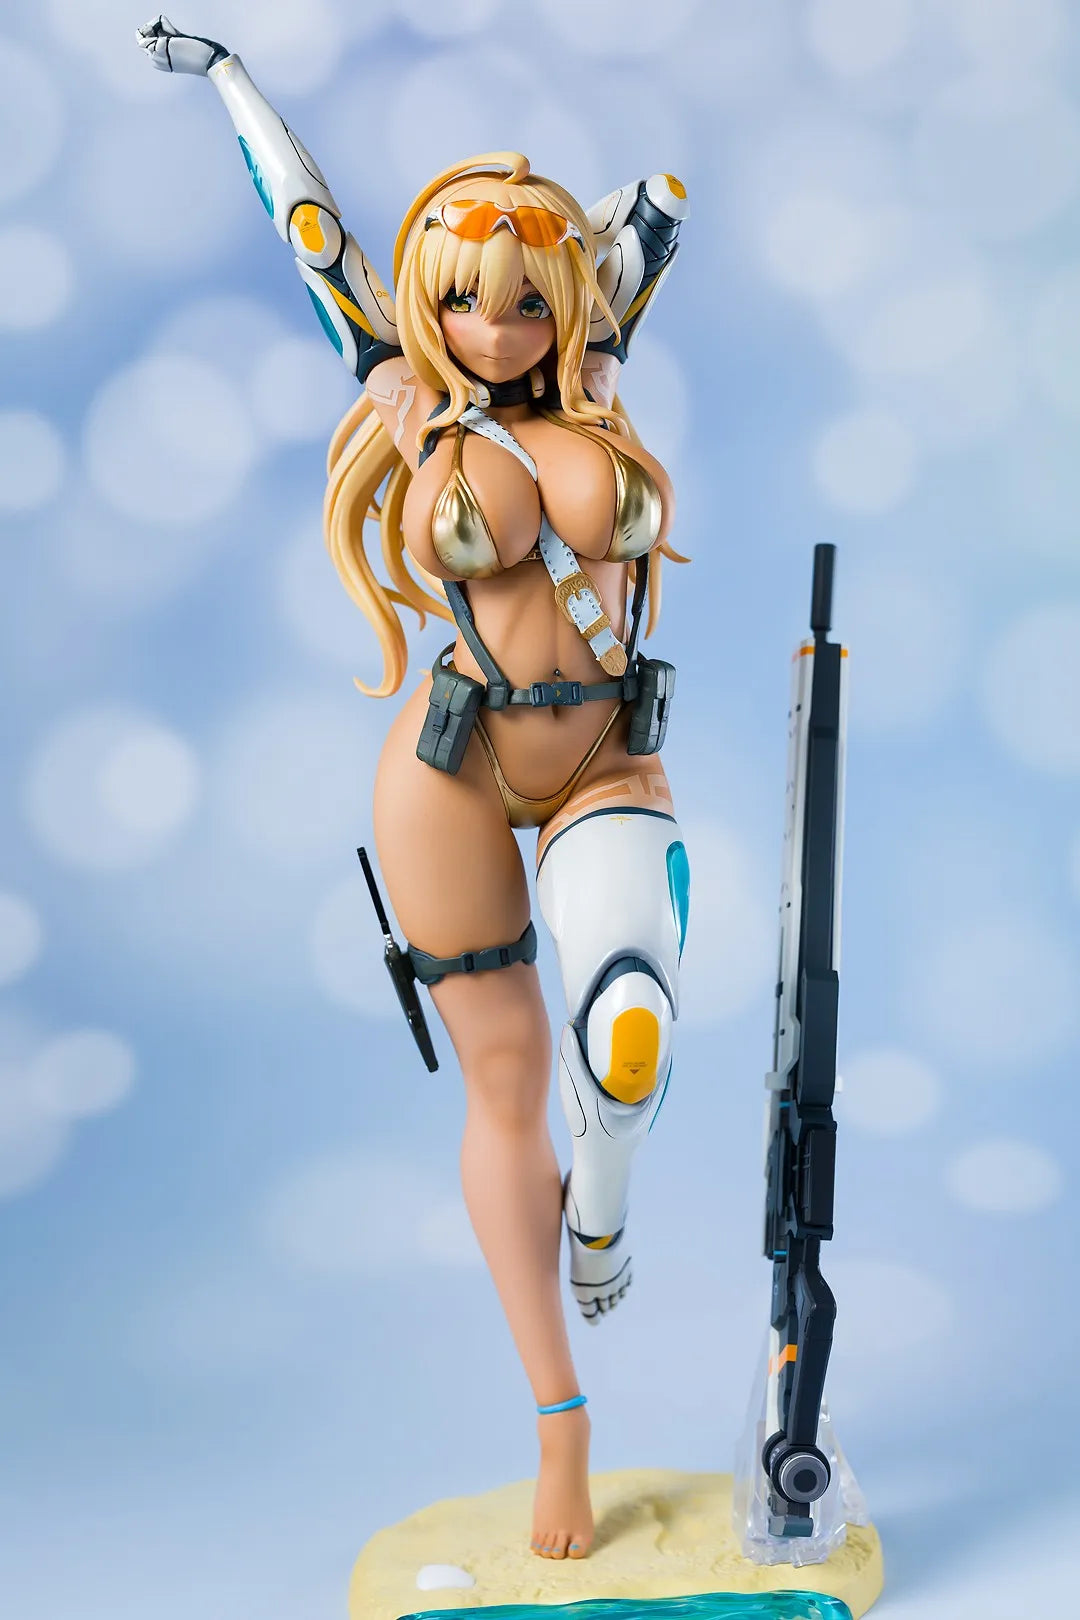 1/6 Alphamax Skytube Anime Figure Girl Sniper illustration by Nidy-2D- DX ver PVC Action Figure Adult Collectible Model Toy Doll